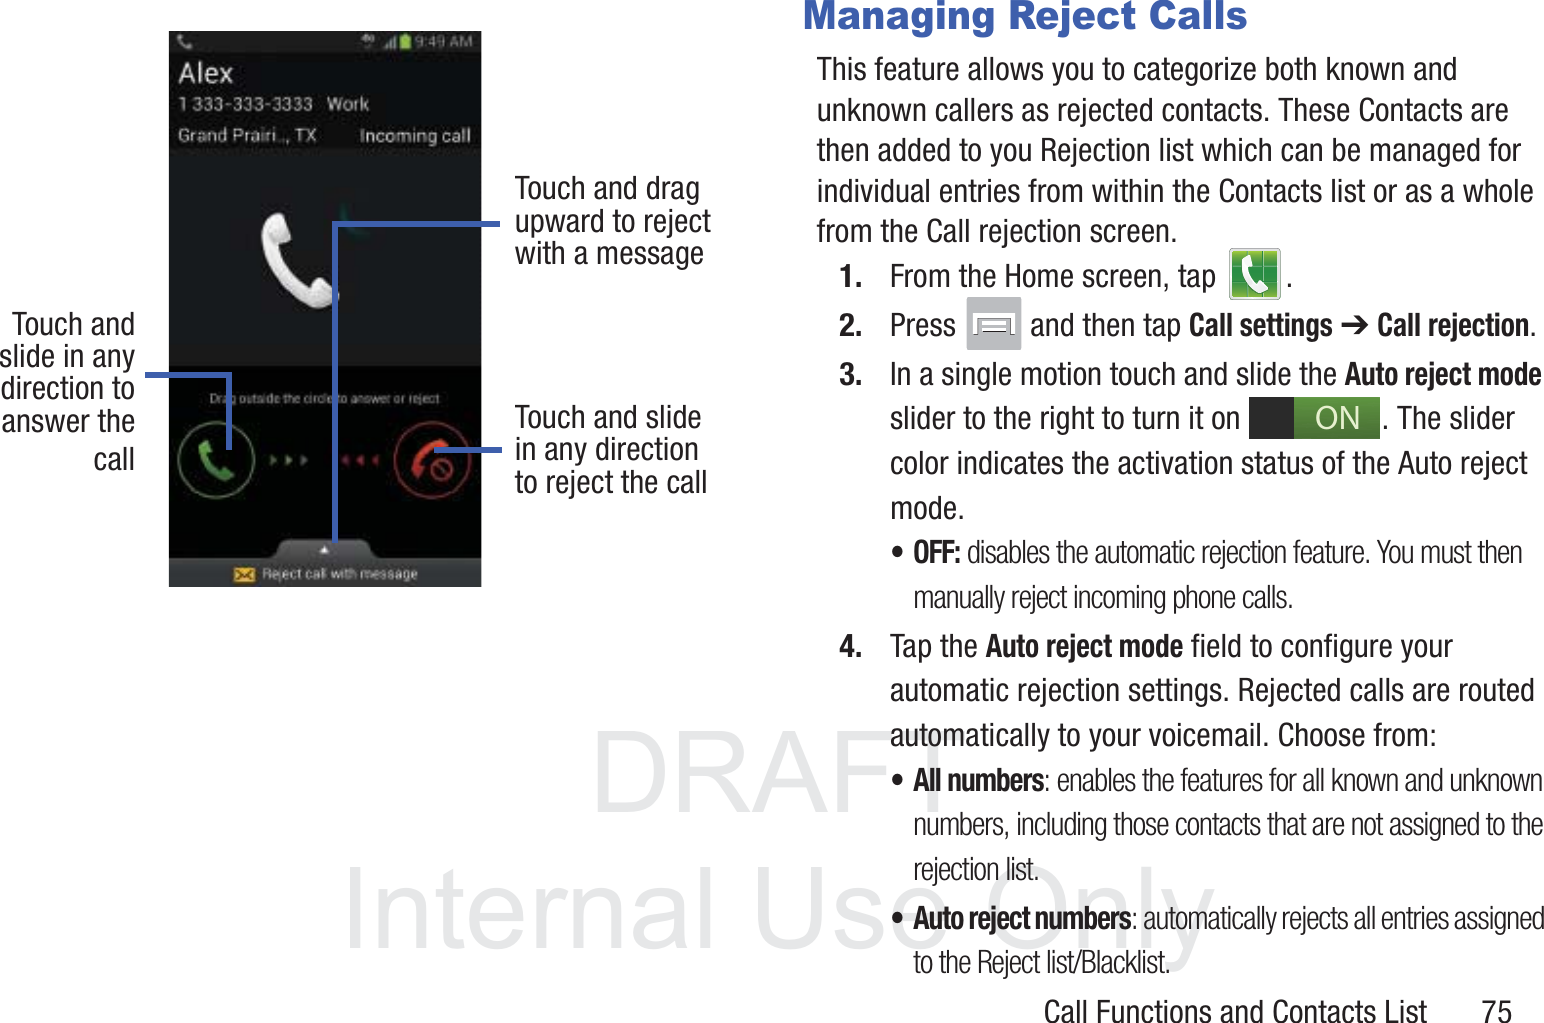 DRAFT InternalUse OnlyCall Functions and Contacts List       75Managing Reject CallsThis feature allows you to categorize both known and unknown callers as rejected contacts. These Contacts are then added to you Rejection list which can be managed for individual entries from within the Contacts list or as a whole from the Call rejection screen.1. From the Home screen, tap  . 2. Press   and then tap Call settings ➔ Call rejection.3. In a single motion touch and slide the Auto reject mode slider to the right to turn it on  . The slider color indicates the activation status of the Auto reject mode.• OFF: disables the automatic rejection feature. You must then manually reject incoming phone calls.4. Tap the Auto reject mode field to configure your automatic rejection settings. Rejected calls are routed automatically to your voicemail. Choose from:• All numbers: enables the features for all known and unknown numbers, including those contacts that are not assigned to the rejection list.• Auto reject numbers: automatically rejects all entries assigned to the Reject list/Blacklist.Touch andslide in anydirection to Touch and slidein any directionto reject the callTouch and dragupward to rejectwith a messageanswer thecallON